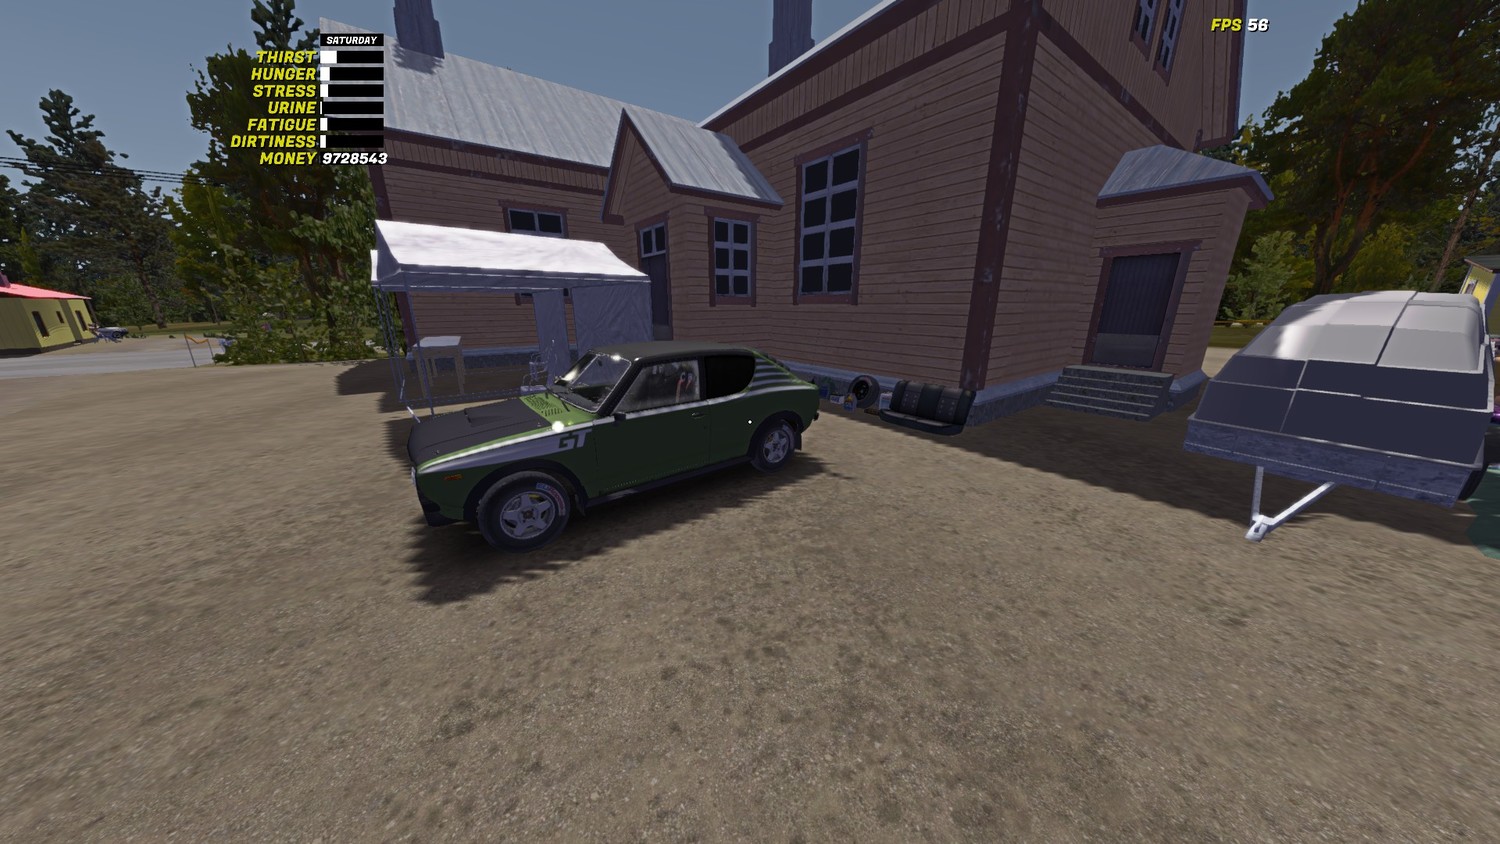 My Summer Car: SaveGame (the car is ready for the rally, there is food in the house)